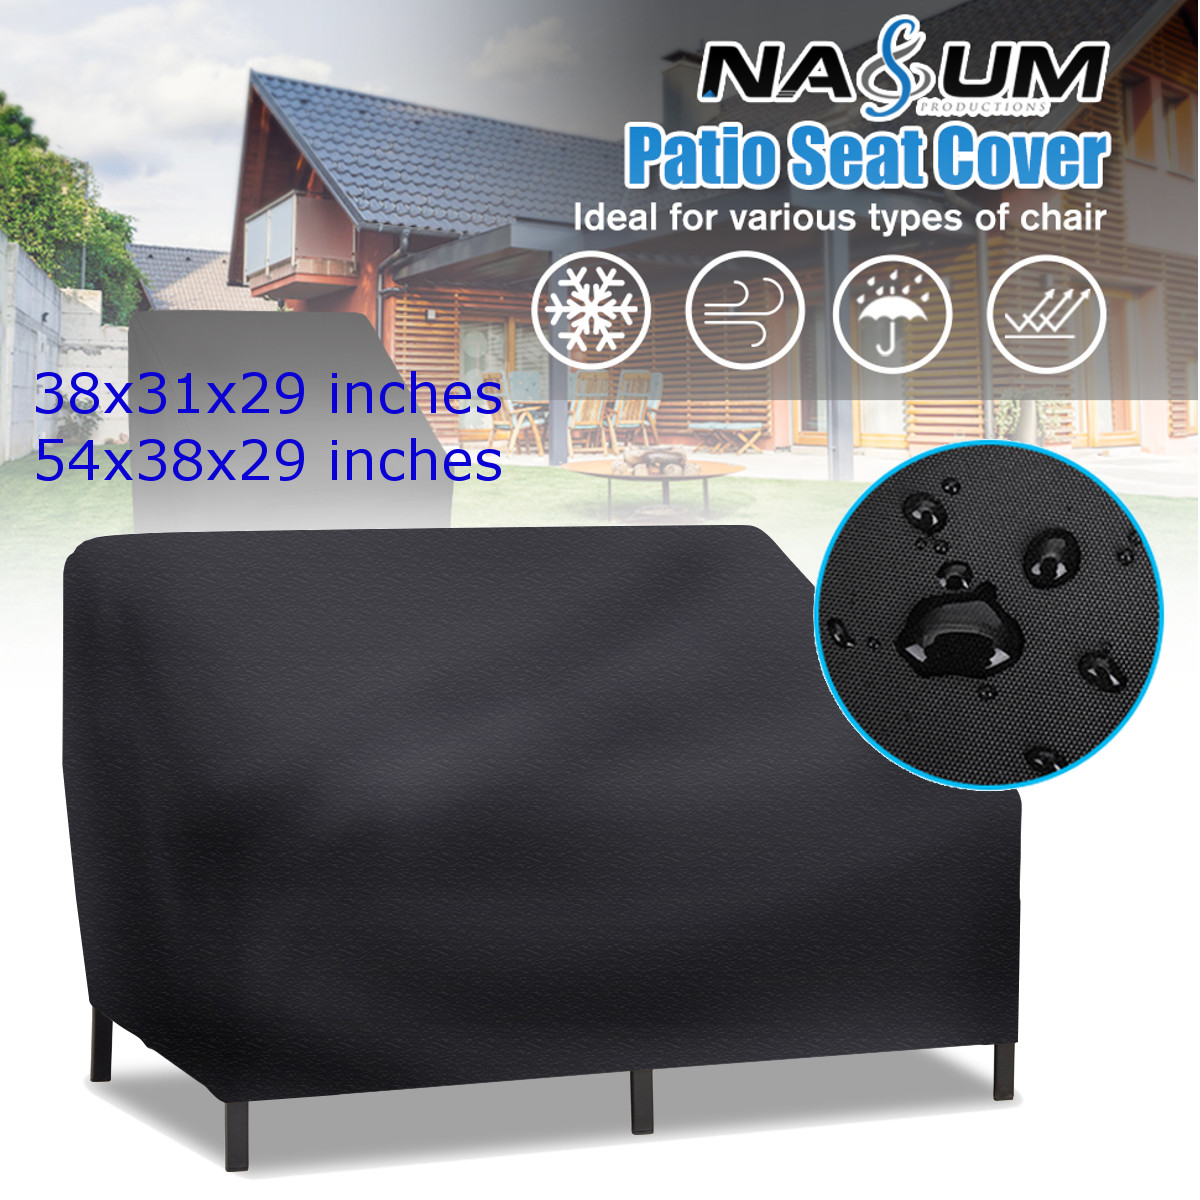 Waterproof-Outdoor-Chair-Sofa-Covers-High-density-Nylon-Oxford-Furniture-Protection-Case-1614787-1